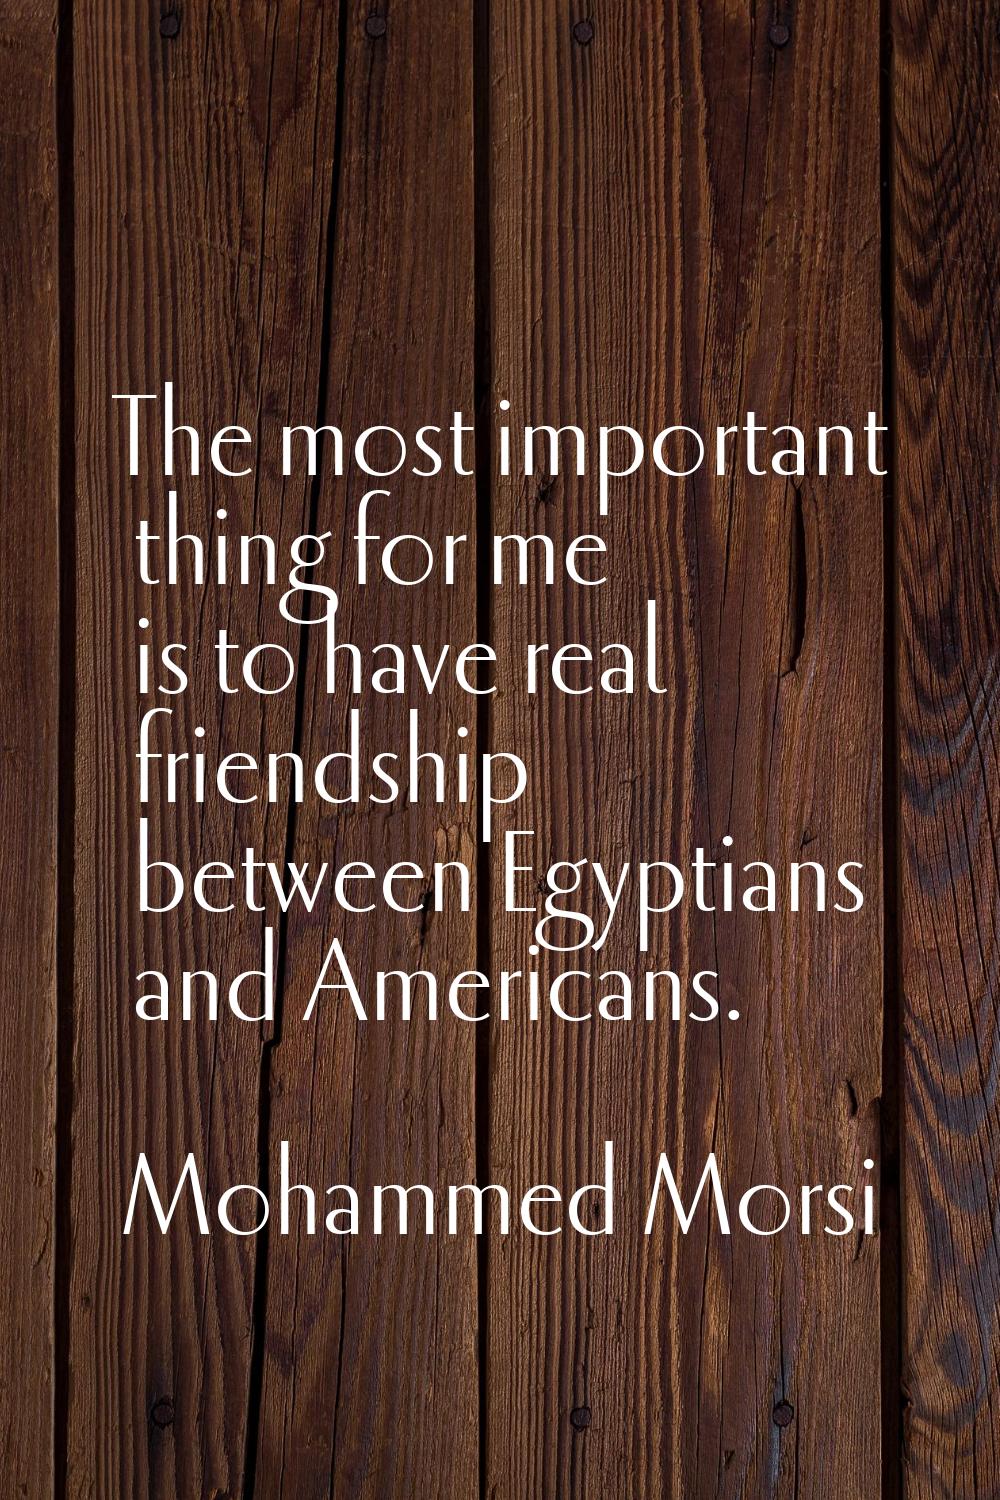 The most important thing for me is to have real friendship between Egyptians and Americans.